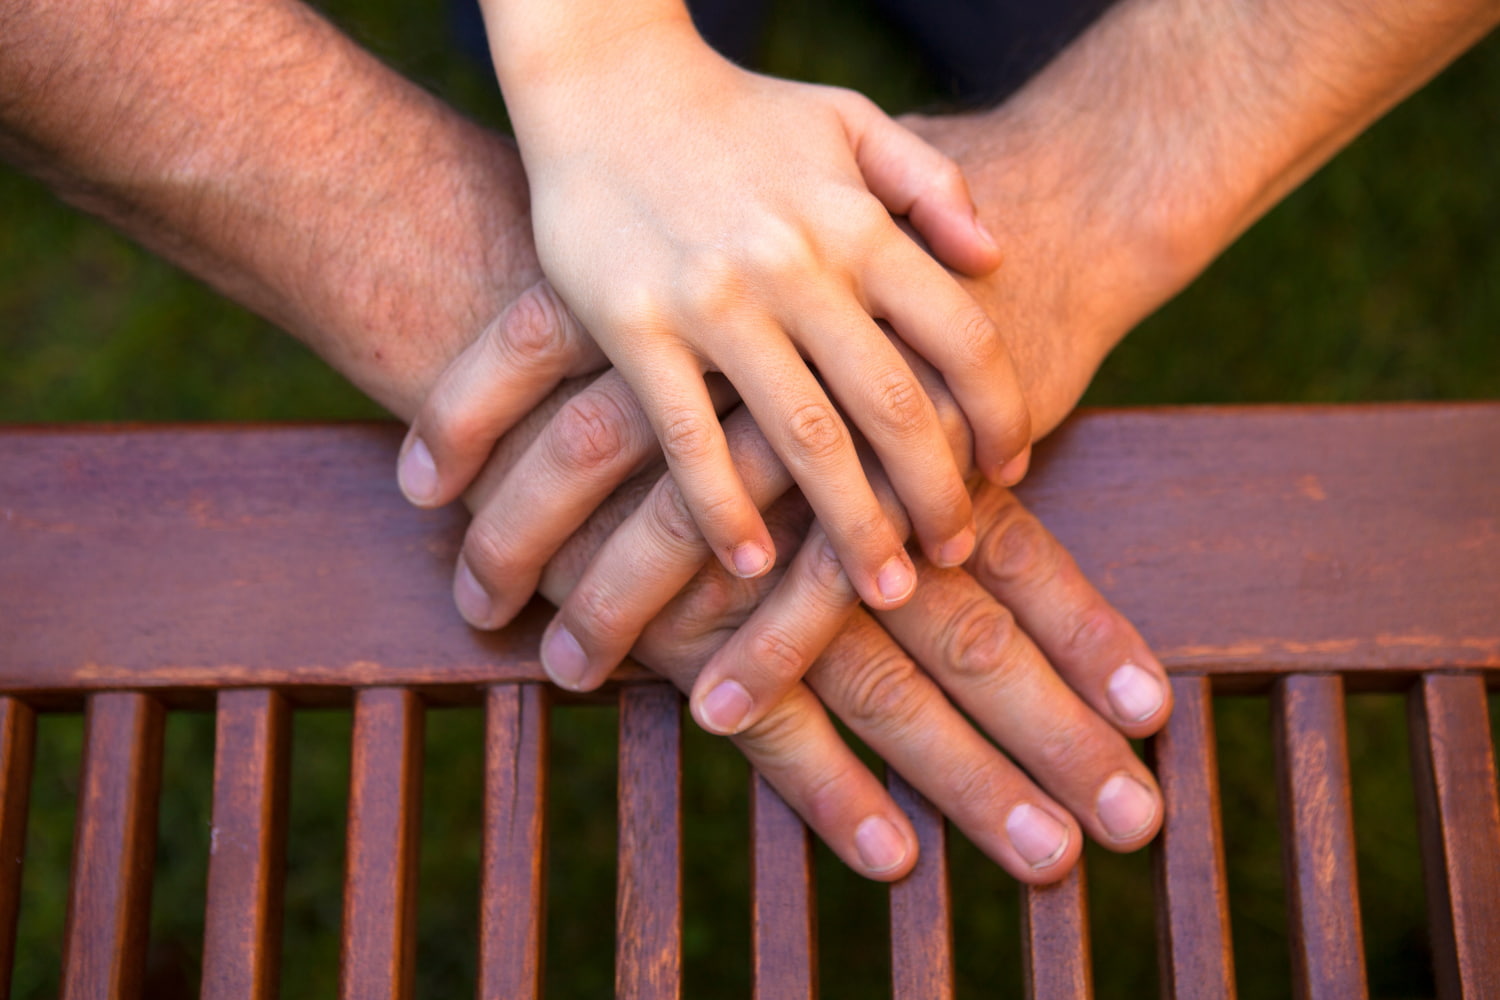 Three generations place their hand on a wooden bench